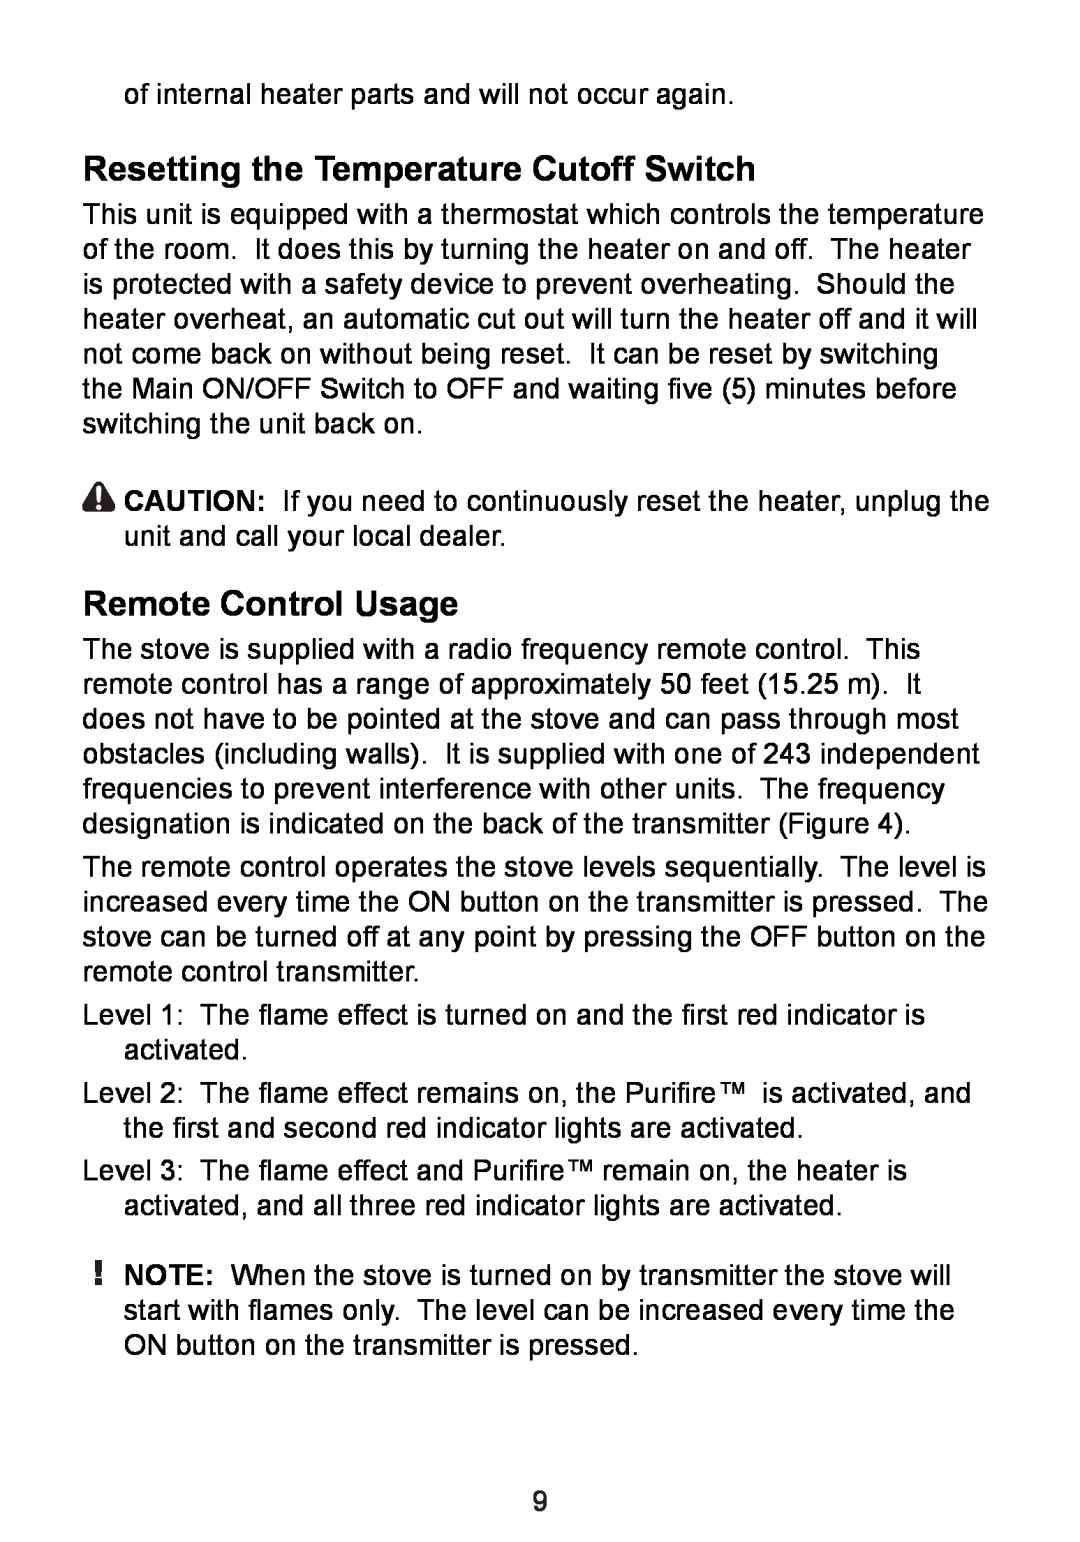 Dimplex CDS8515, TDS8515 owner manual Resetting the Temperature Cutoff Switch, Remote Control Usage 